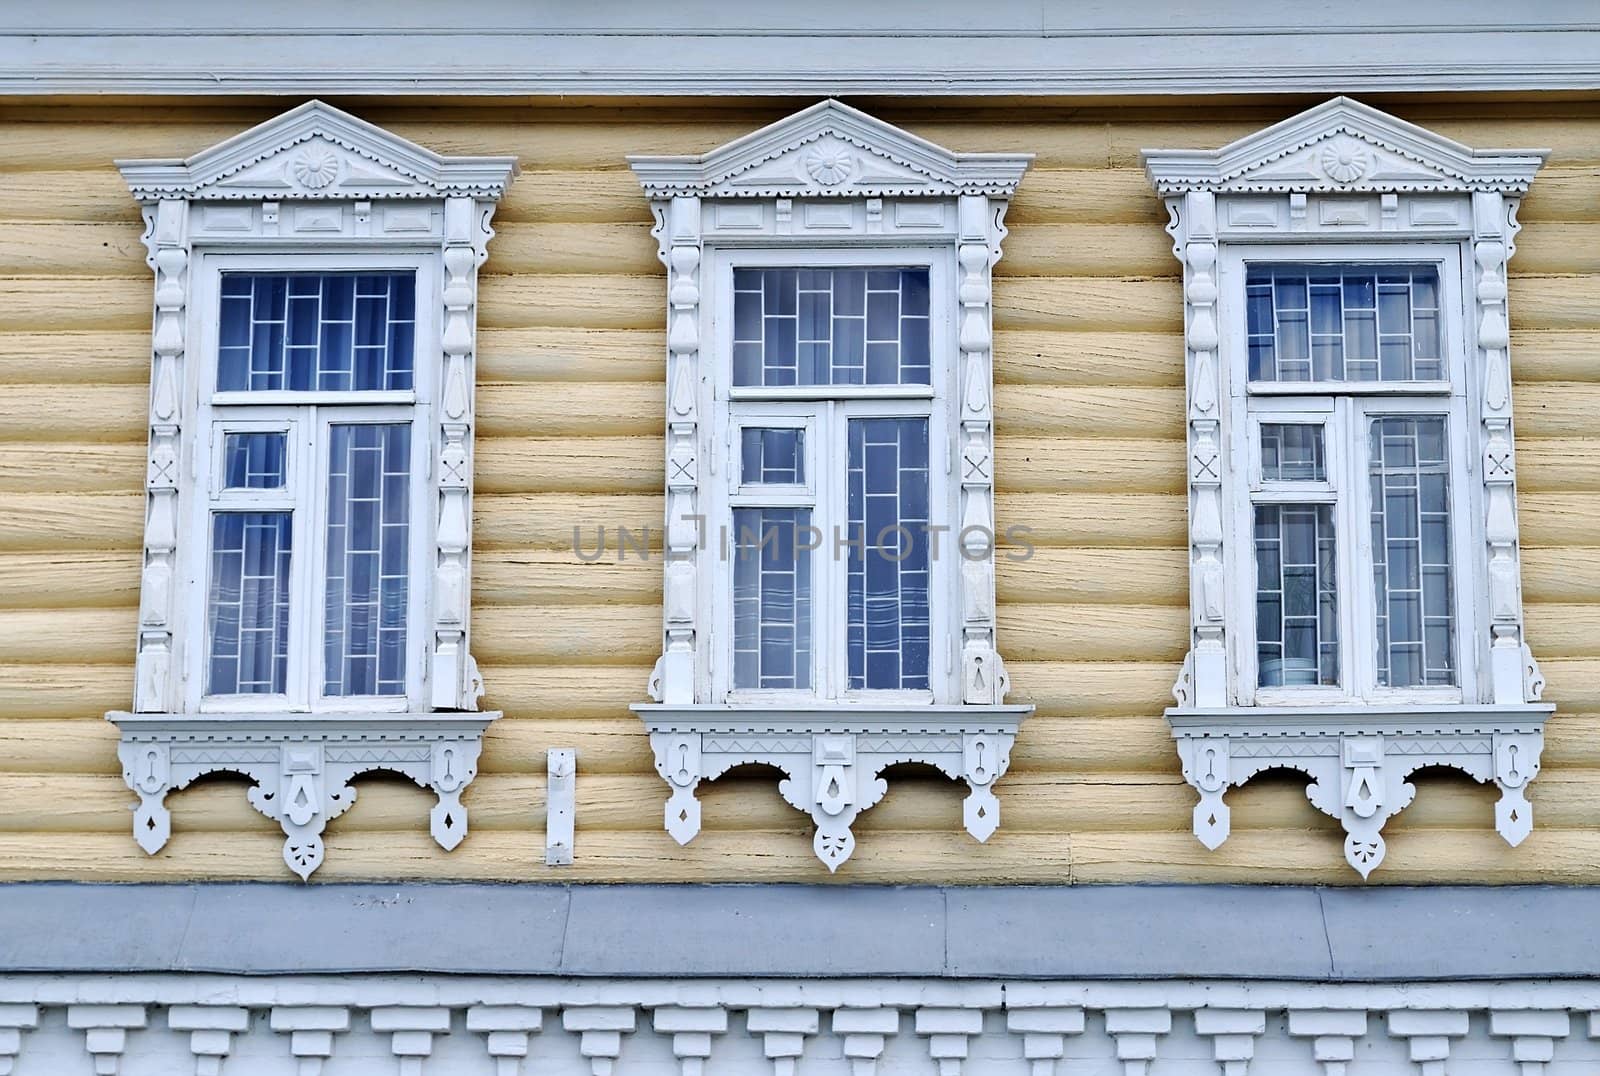 Windows of wooden building with traditional for Russian village trimming